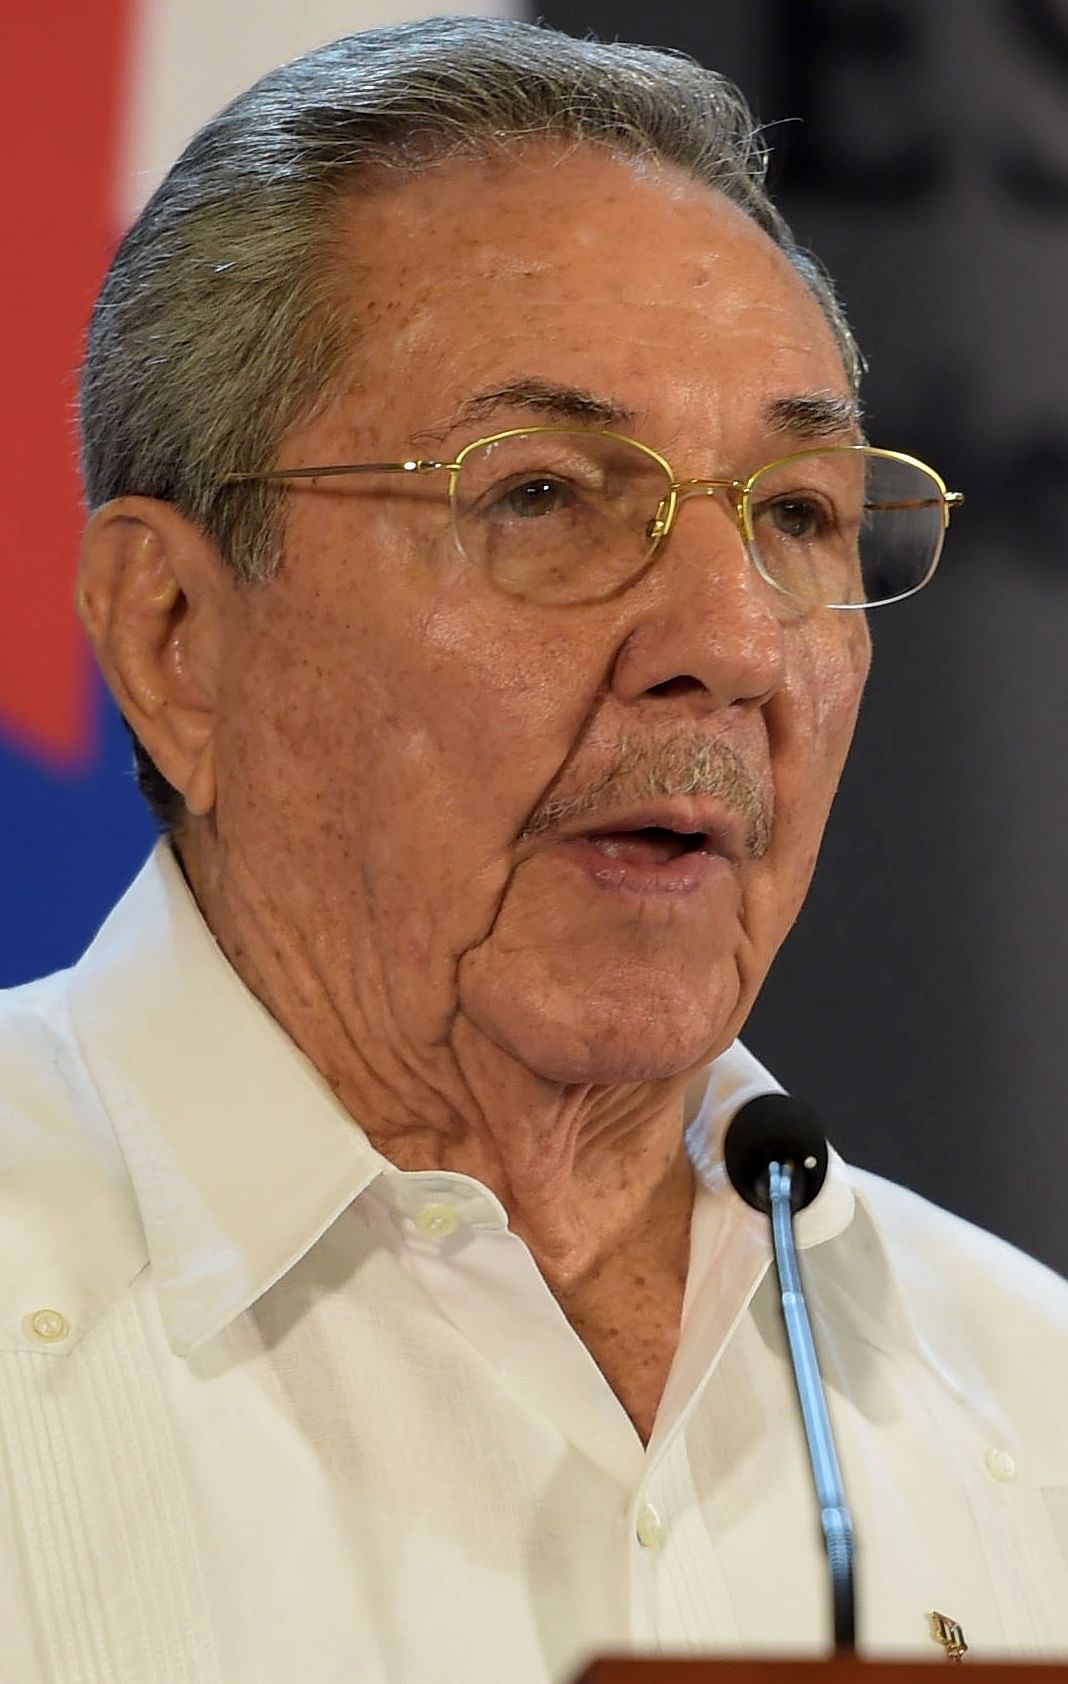 <div class="paragraphs"><p>Raul Castro on Friday, 18 April said that he is stepping down as the head of Cuba’s communist party.</p></div>